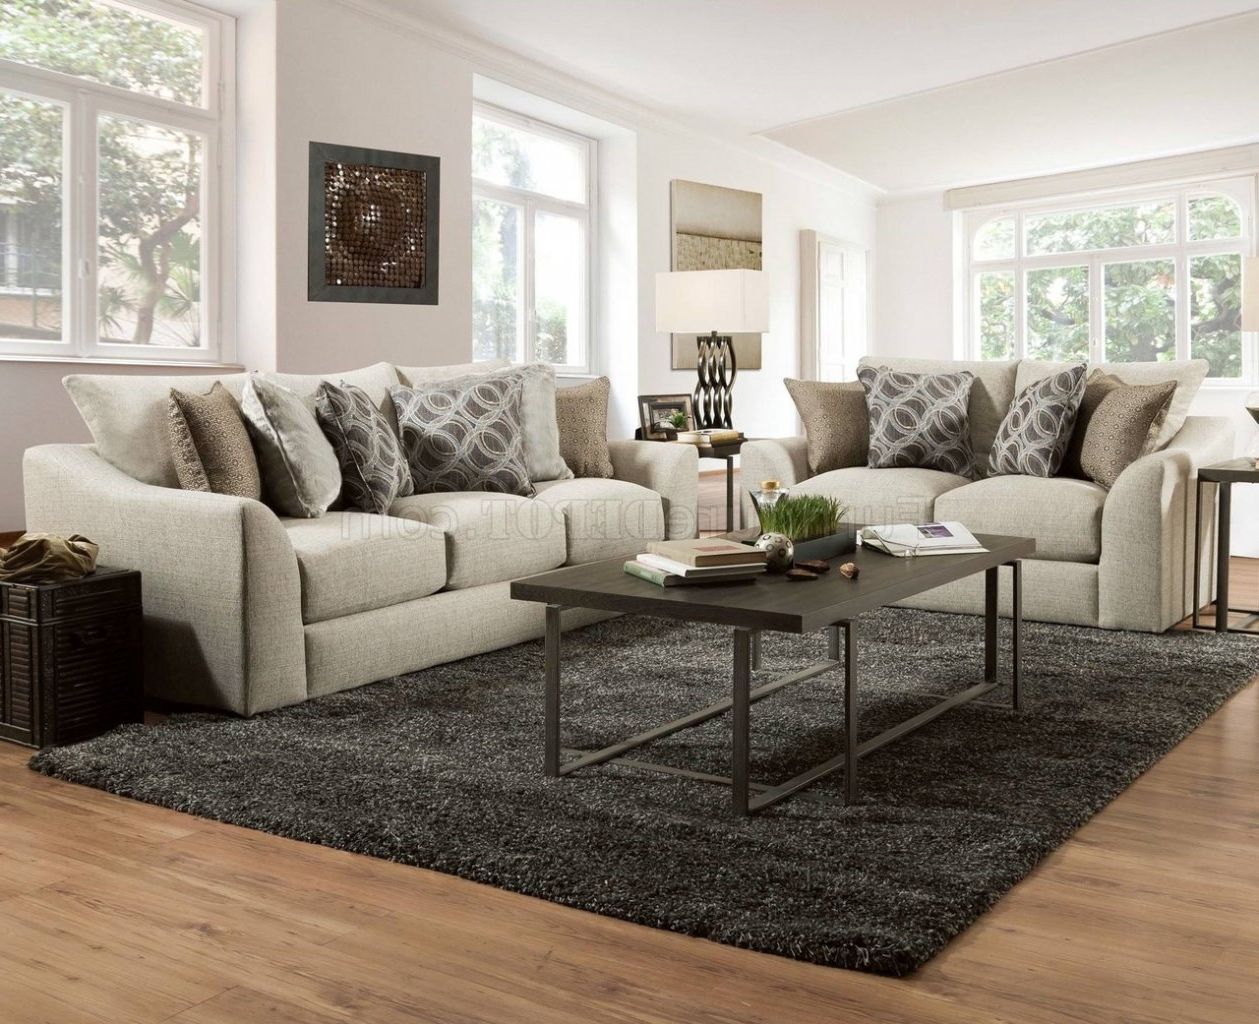 Trendy 2 Piece Oversized Sofa & Loveseat Set In Espresso Micro Suede Inside 110" Oversized Sofas (View 11 of 15)